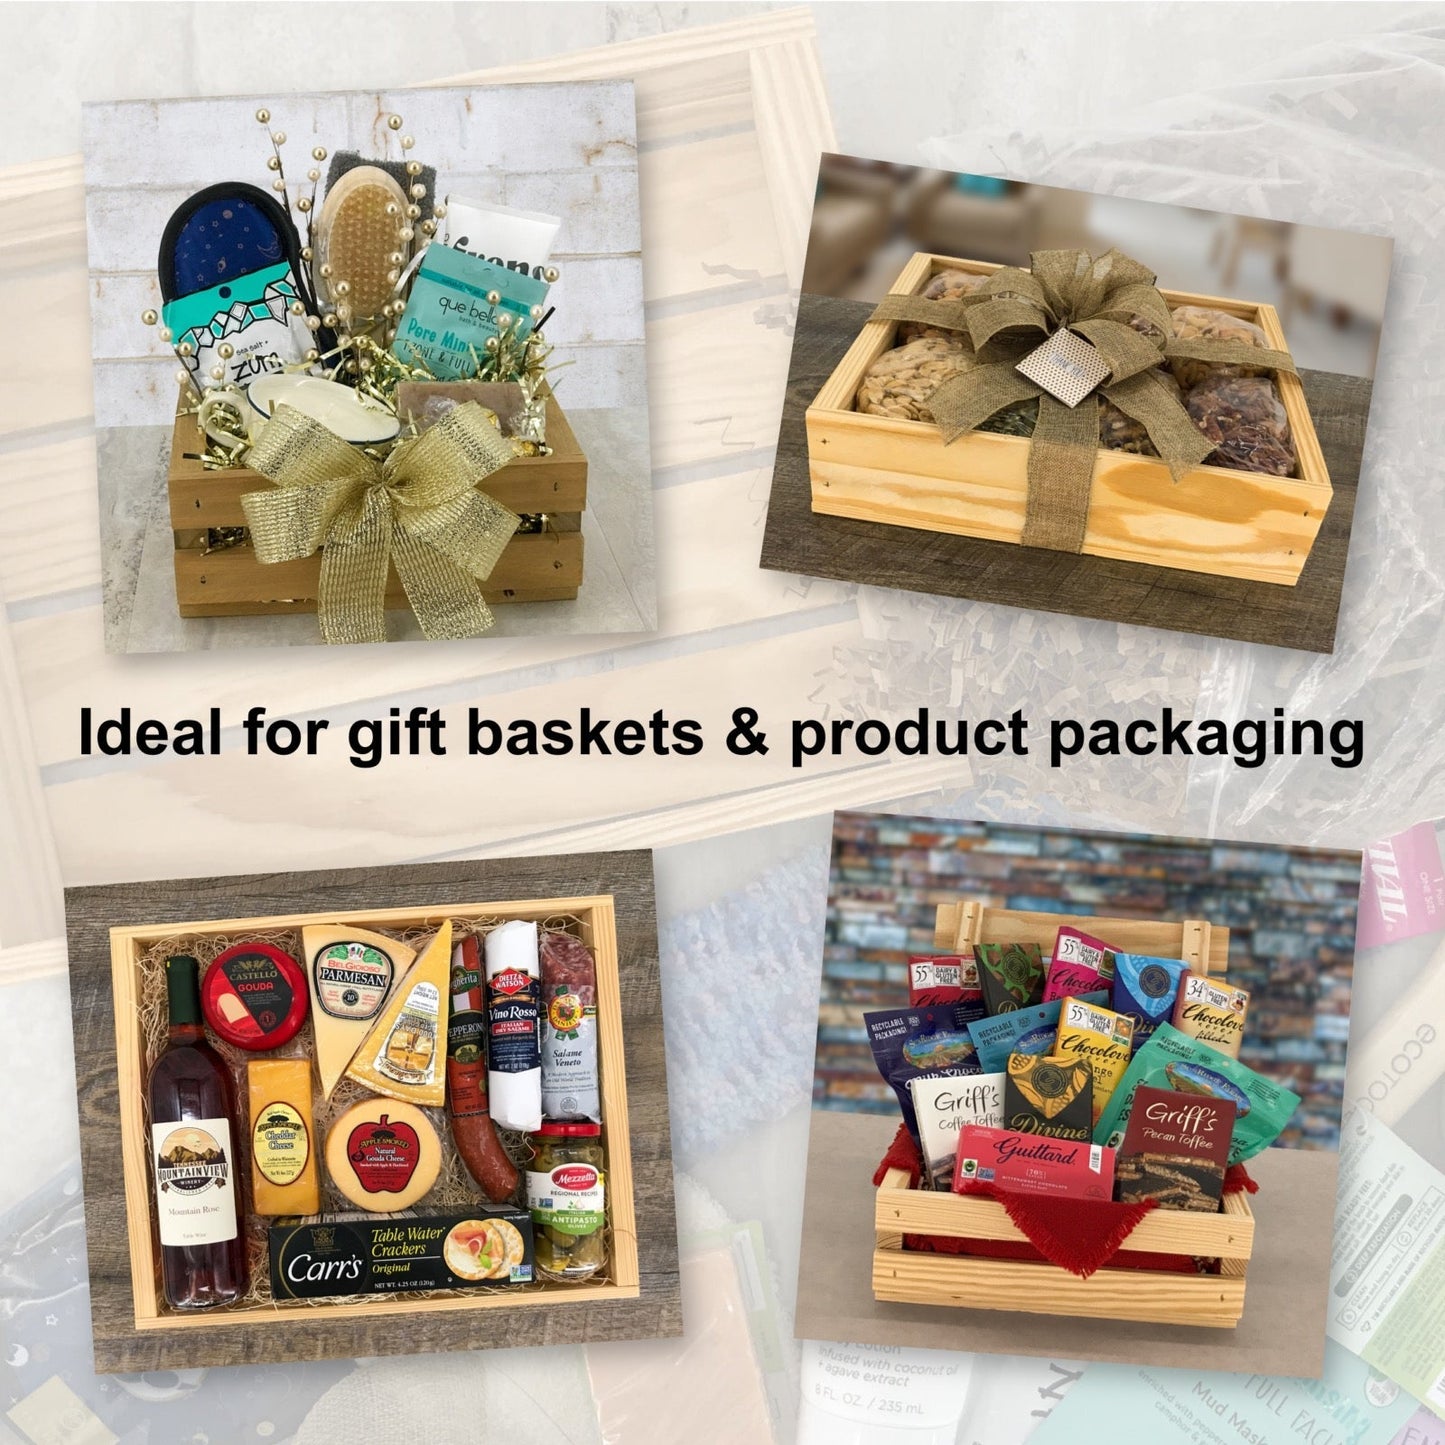 Ideal for gift baskets and product packaging, SS-10-8-2.5-ST-NW-NL, 6-SS-10-8-2.5-ST-NW-NL, 12-SS-10-8-2.5-ST-NW-NL, 24-SS-10-8-2.5-ST-NW-NL, 48-SS-10-8-2.5-ST-NW-NL, 96-SS-10-8-2.5-ST-NW-NL